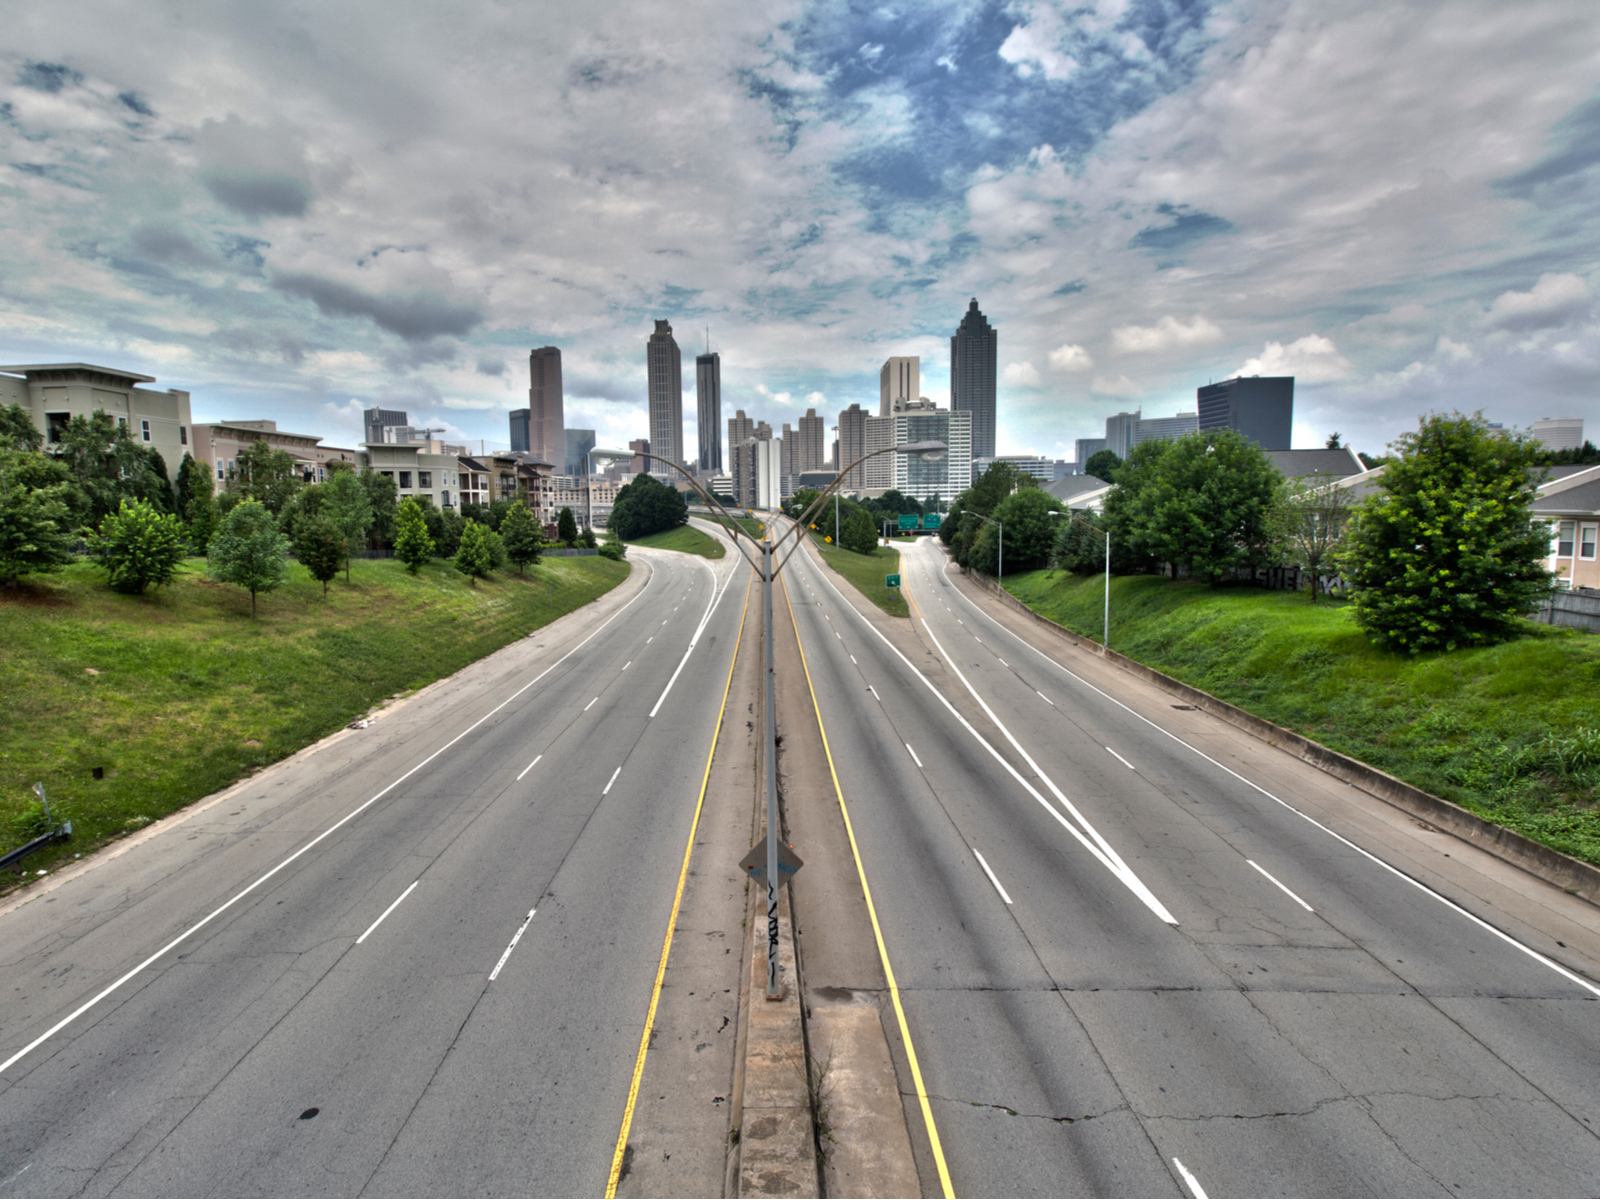 One of the best things to do in Atlanta, view the Jackson Street Bridge, where the Walking Dead was filmed